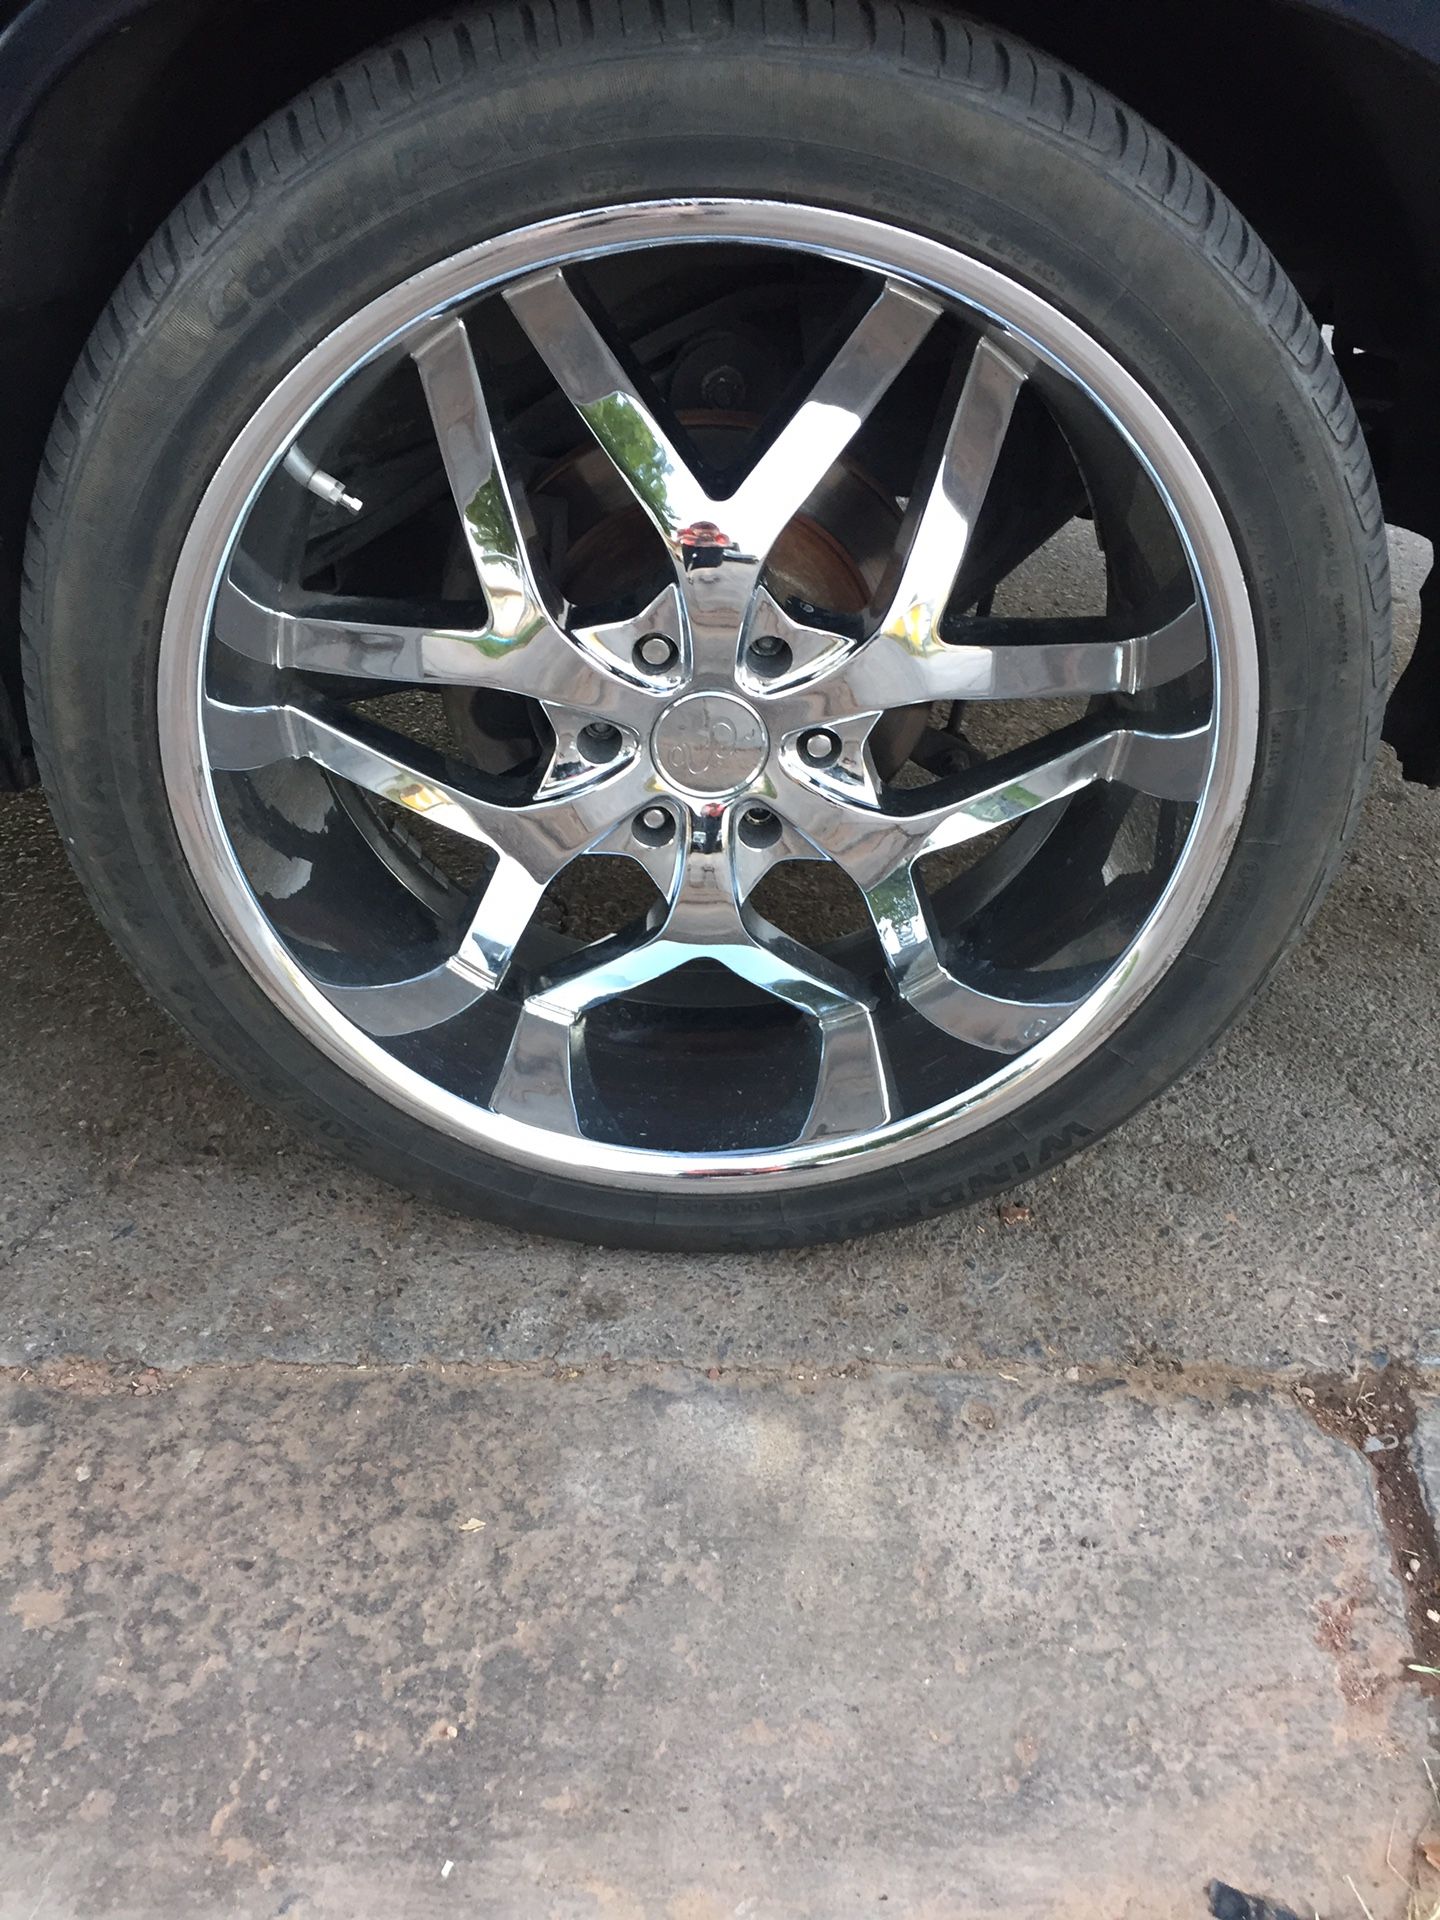 24” 6 lug rims with new tires $450 obo plus stocks for a Tahoe